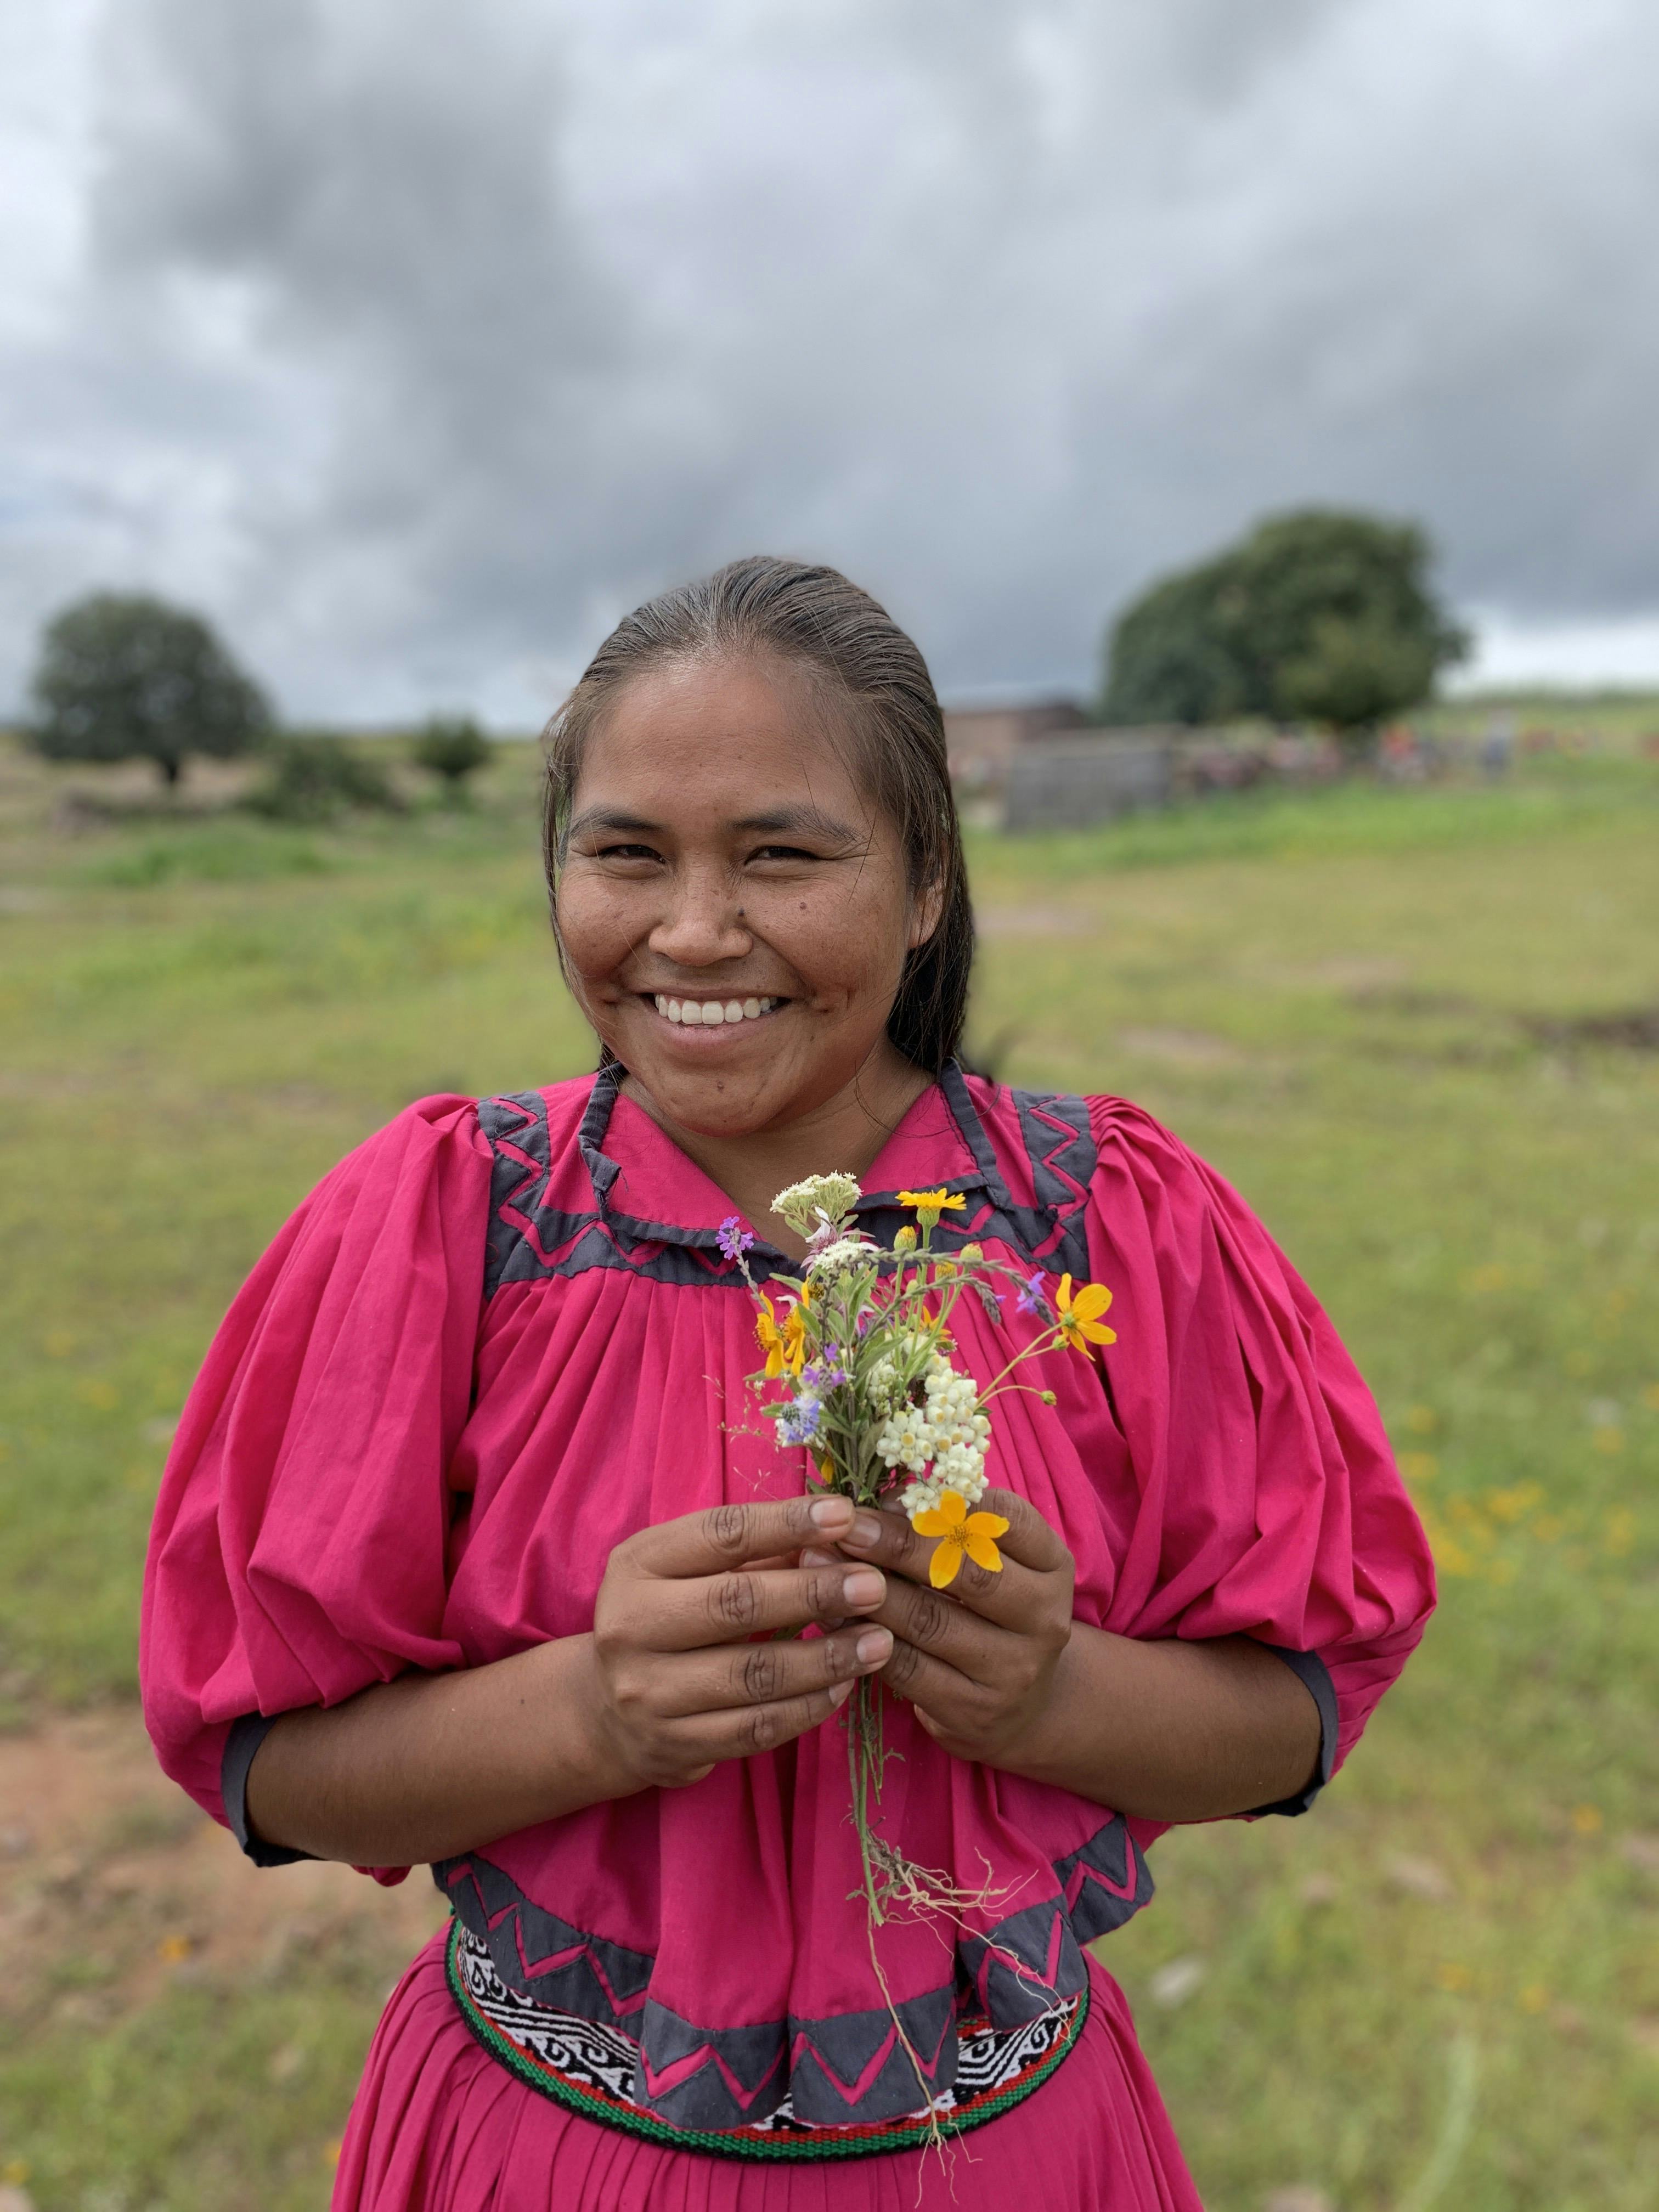 Woman in pink traditional dress holding flowers and smiling at the camera